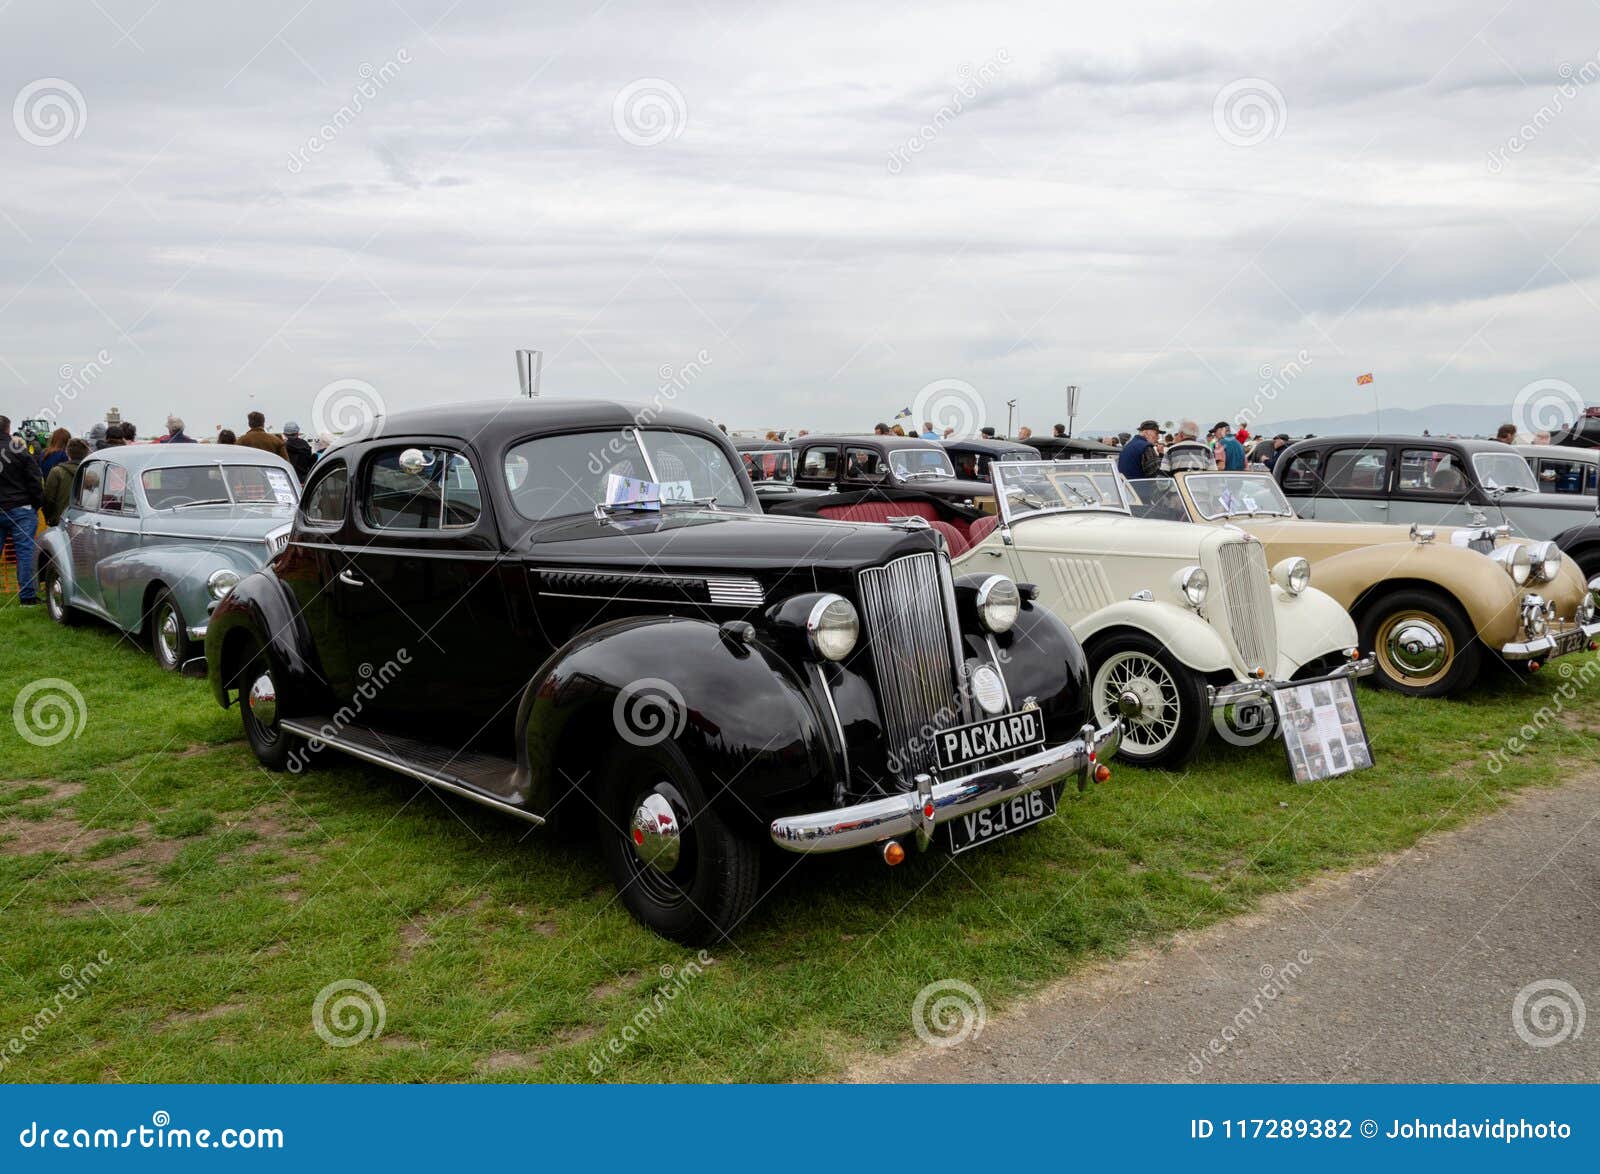 Classic Cars at the Anglesey Vintage Rally Editorial Photography ...